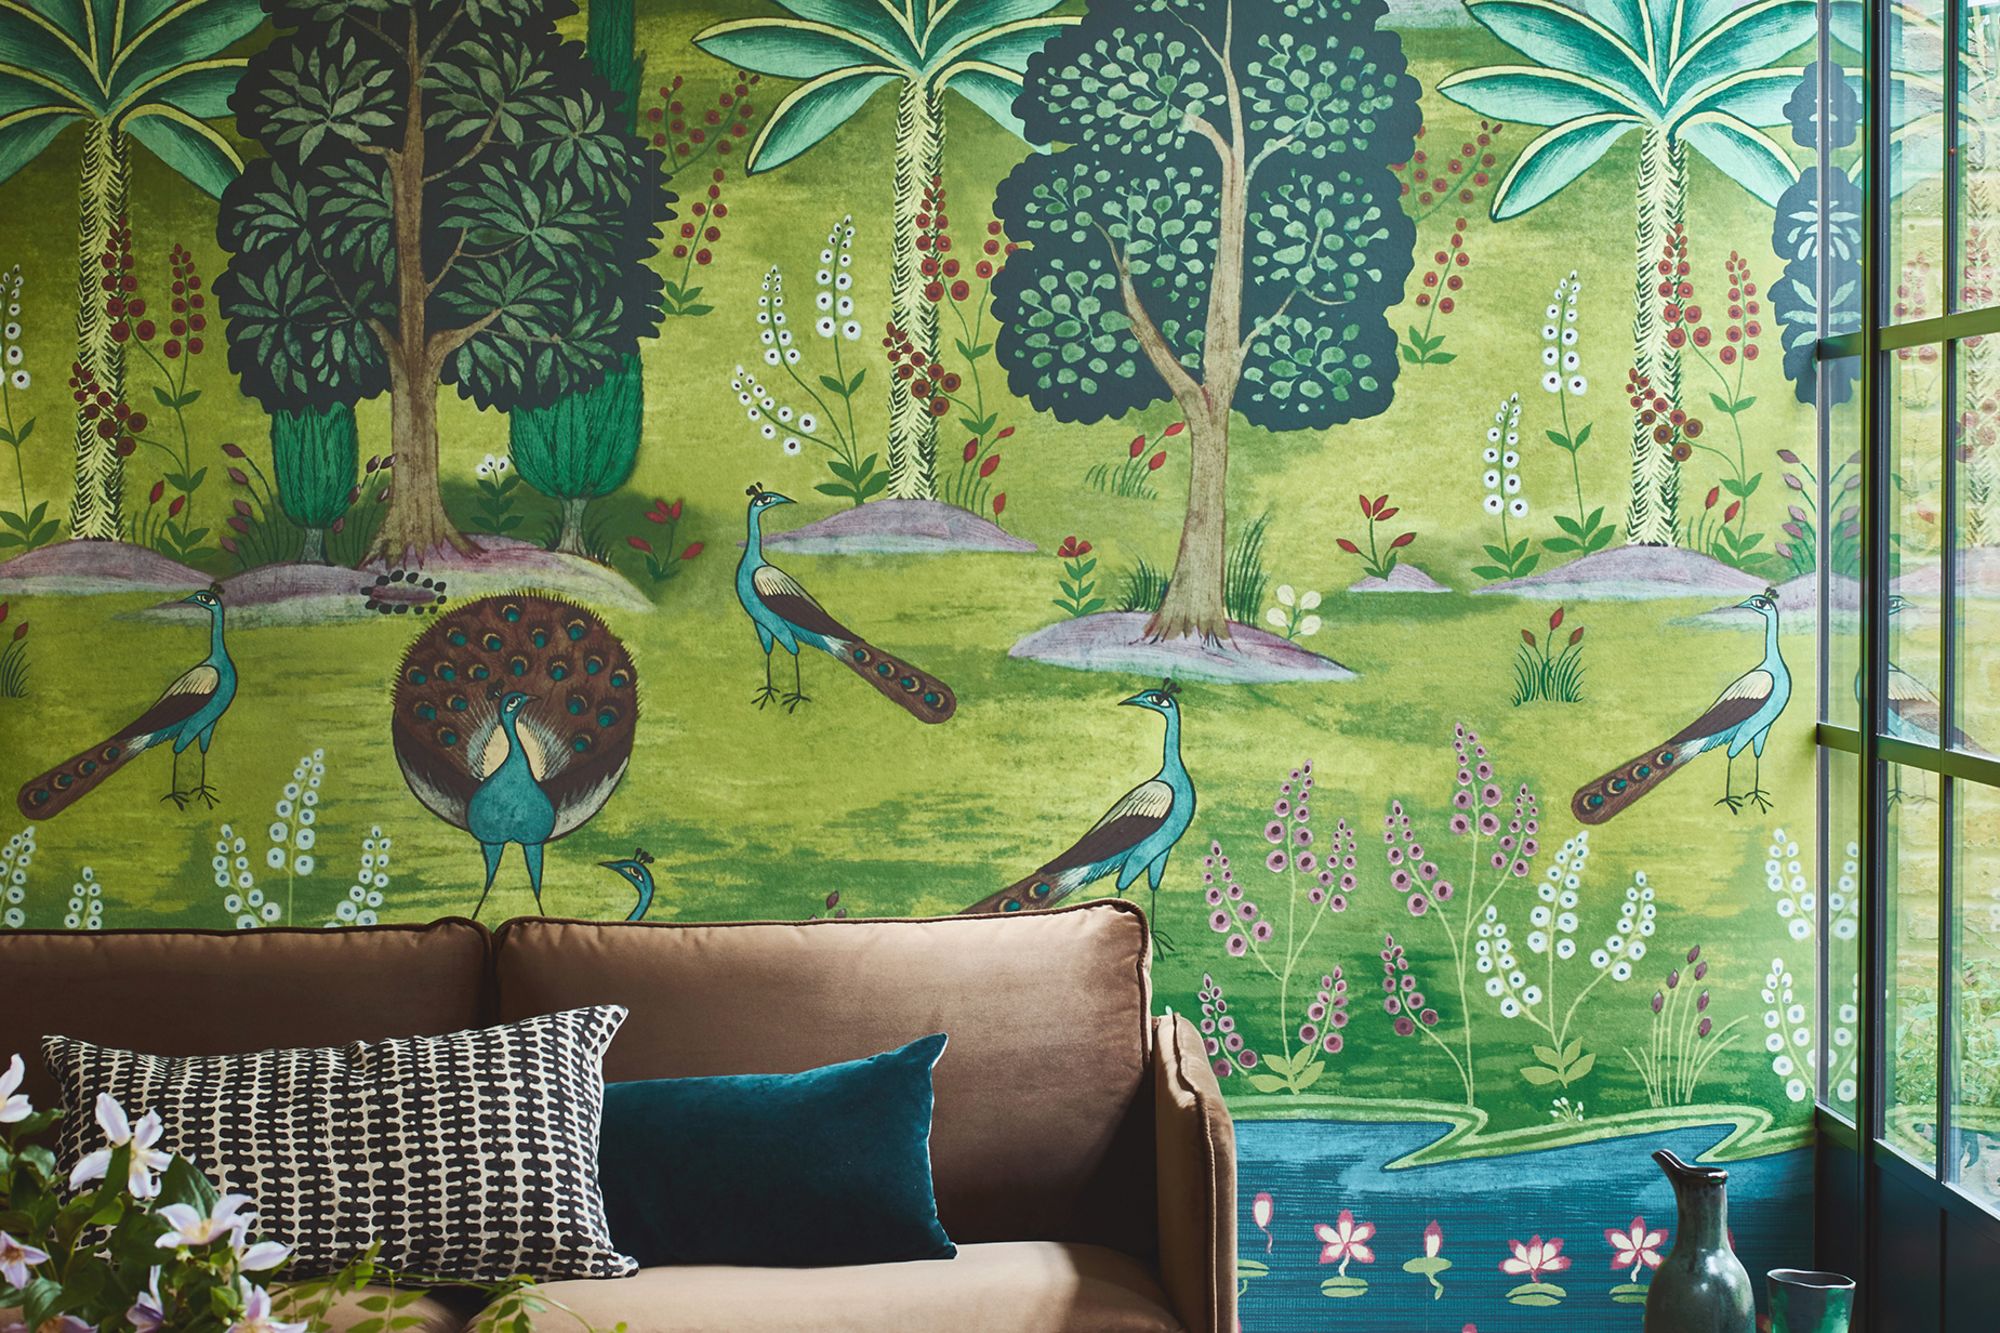 Featuring peacocks, stylized palms and lotus blossoms on a tranquil river, this "Garland of Ragini" wall mural is based on an Indian artwork from the early 18th century.